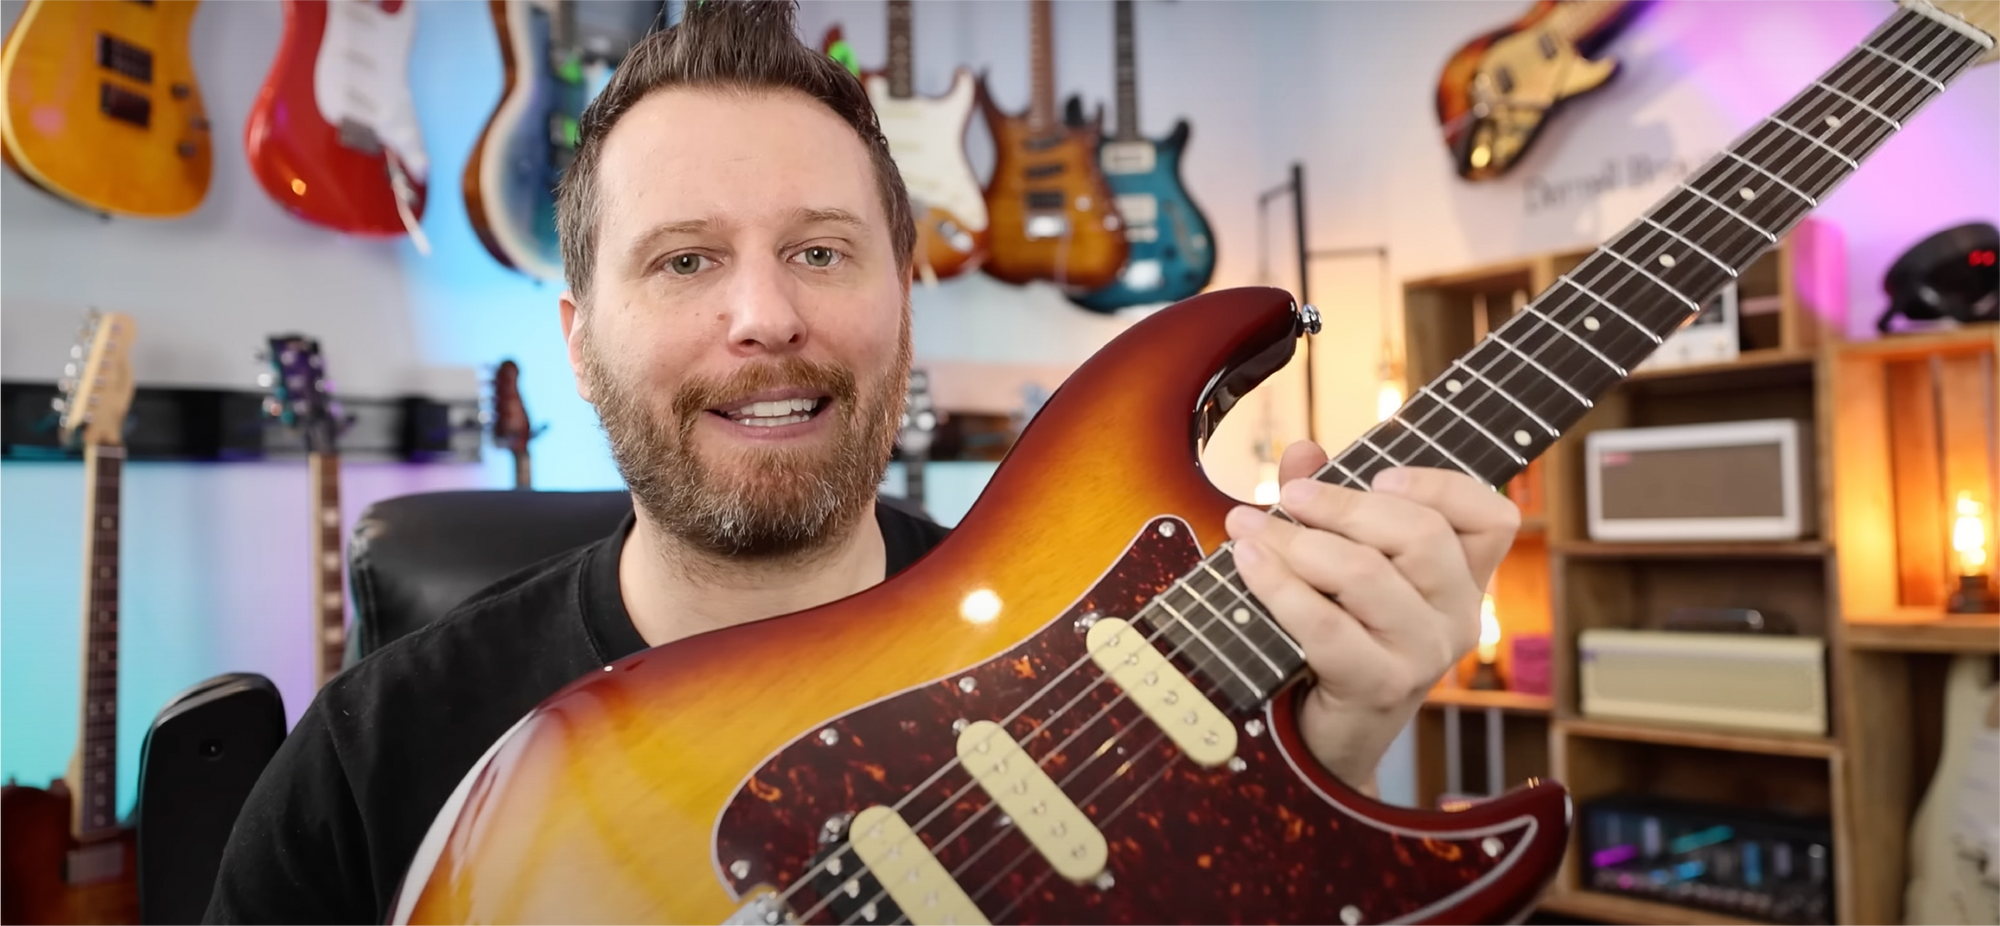 Darrell Braun Weighs Up the Sire 2022 Guitar Models, What are His Assessments?